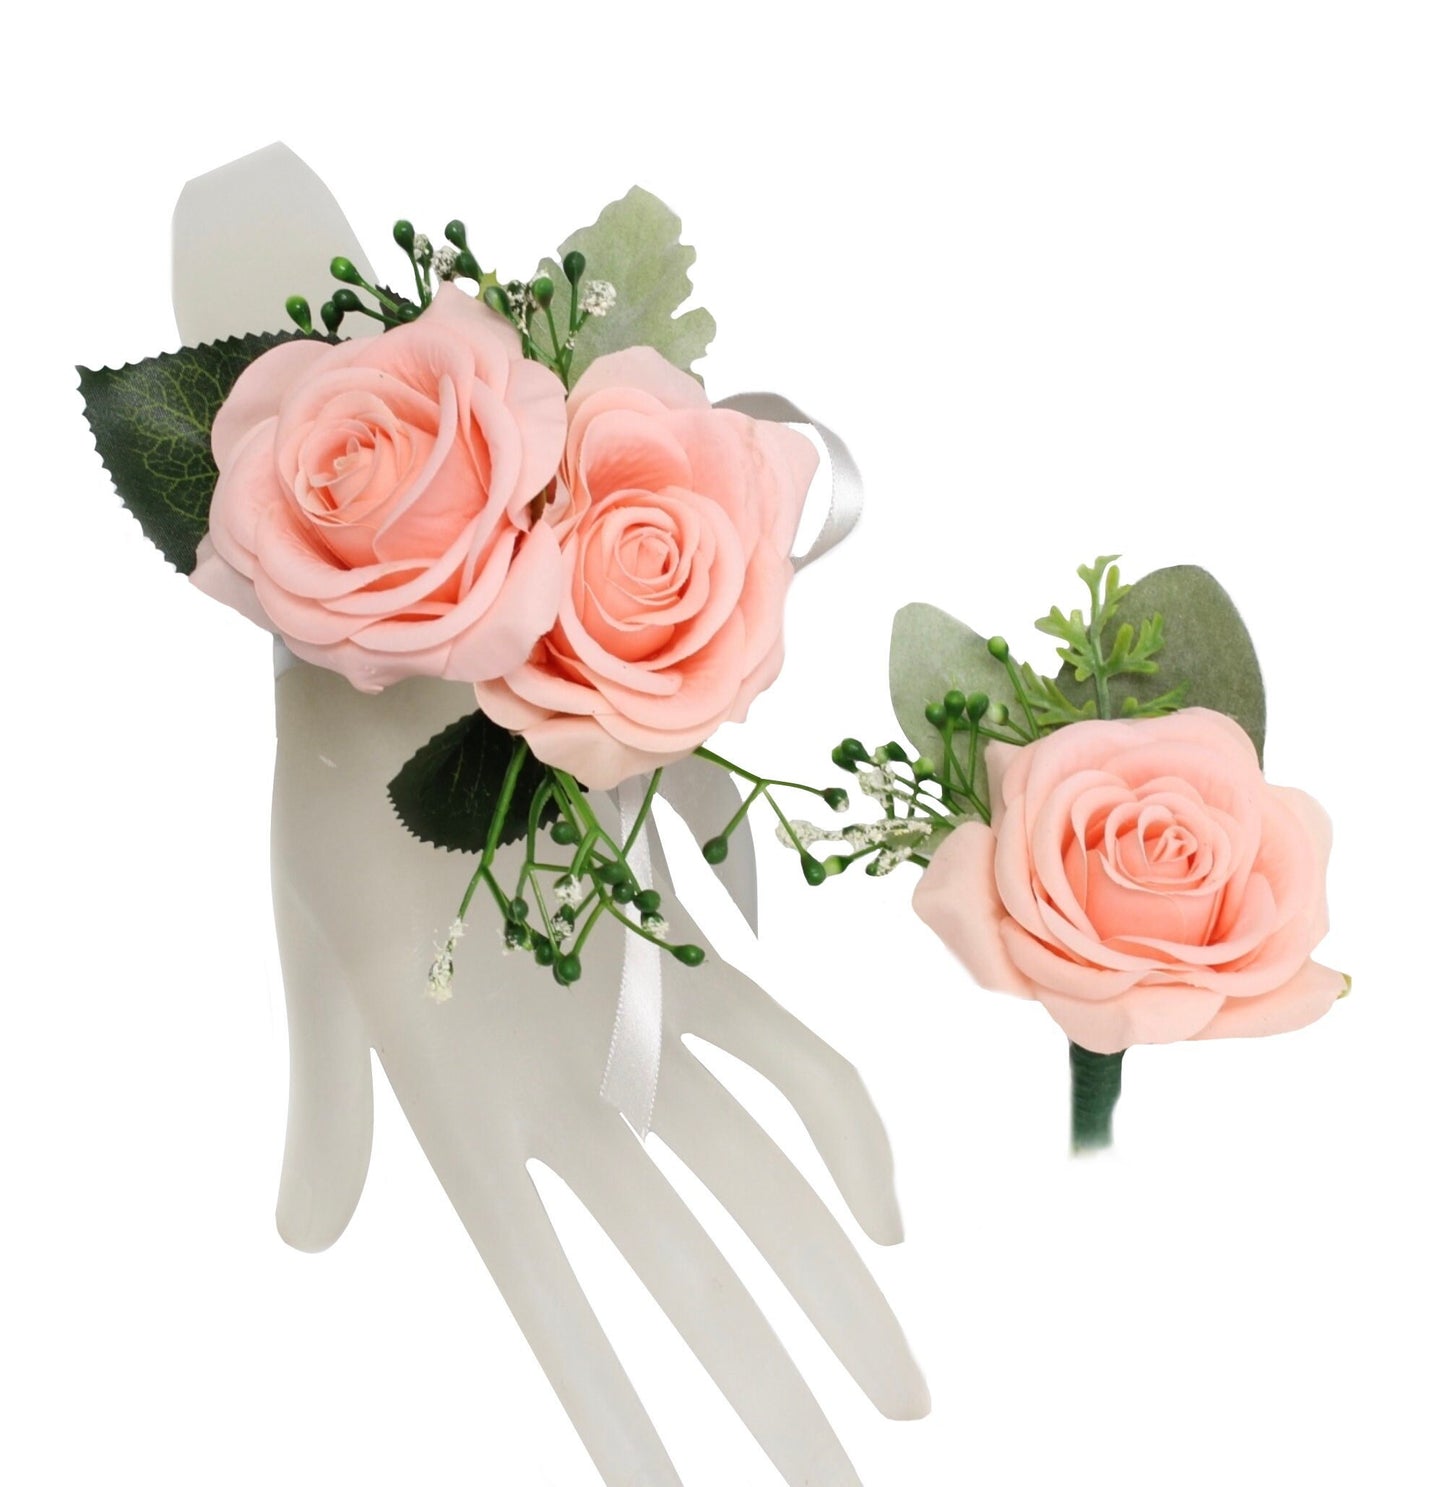 Luxurious Life-Like Rose Corsage & Boutonniere Set – Choose Your Color